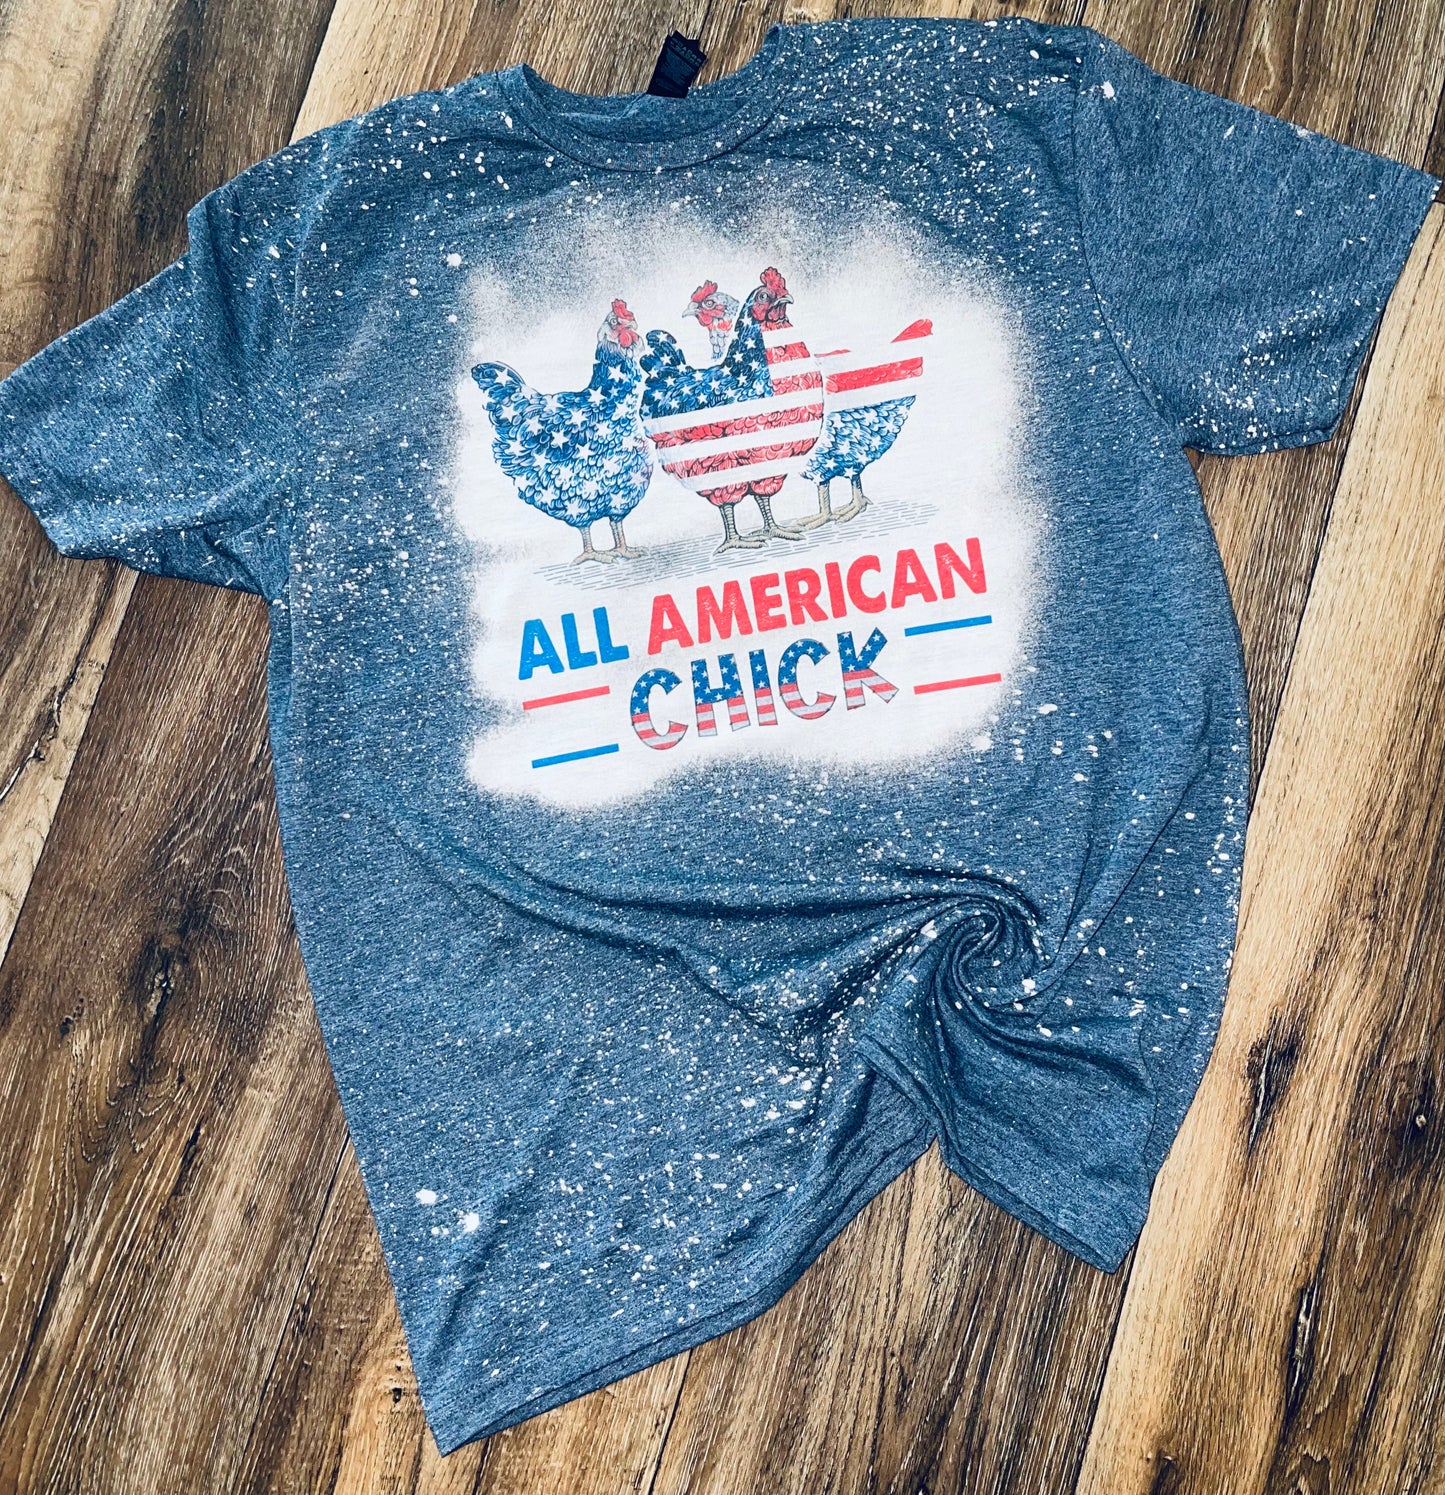 All American chick tee